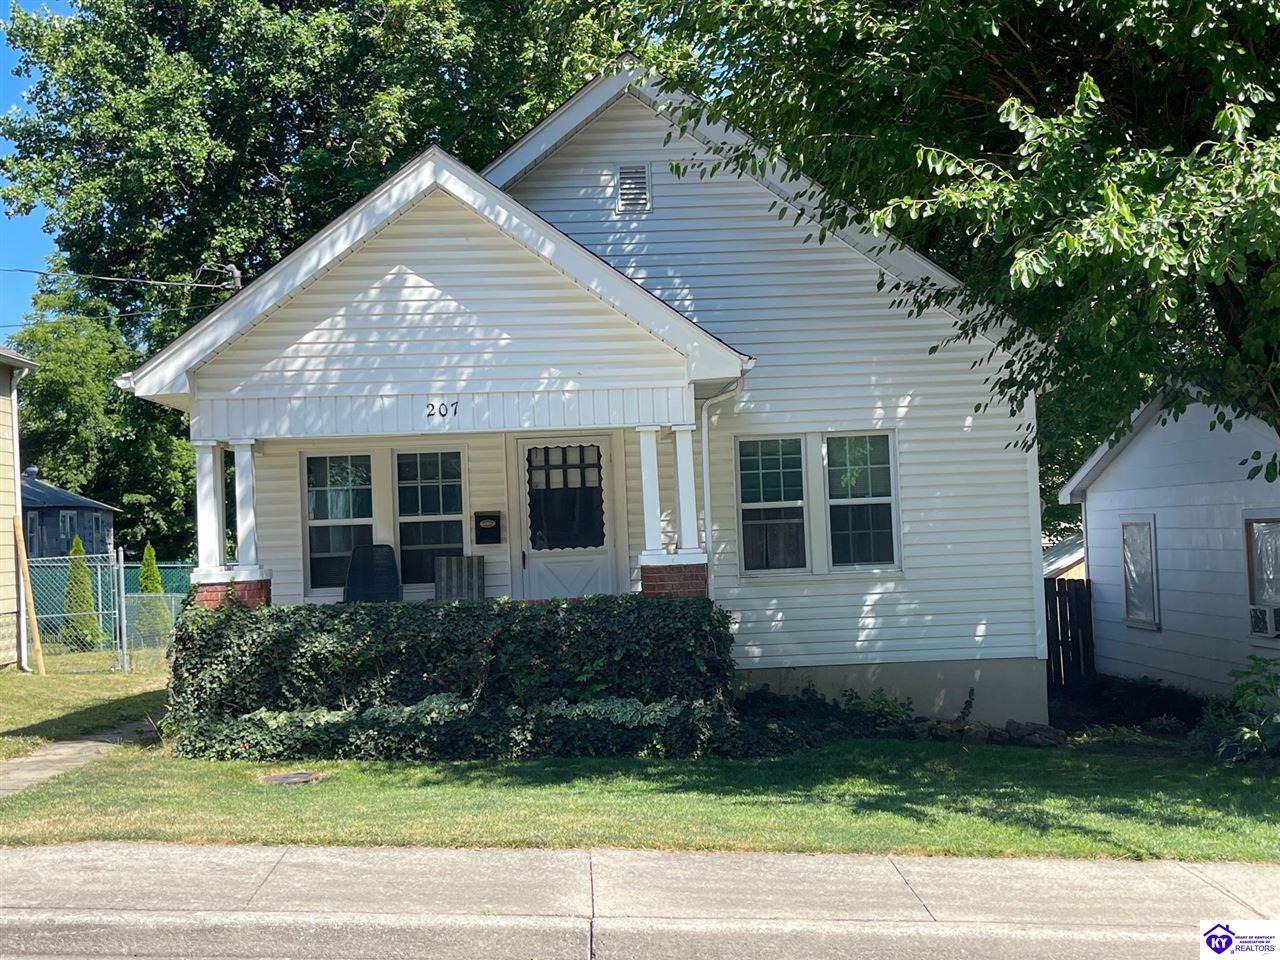 Great Classic Home in the Heart of Downtown Elizabethtown.  The home built in 1936 features 2 bedroom, a possible 3rd bedroom or office,1 bath, dining room,  a , and a great covered front porch.  It has newer vinyl windows and siding. Home is SOLD AS IS! Buyer and Buyer's agent to verify all information.